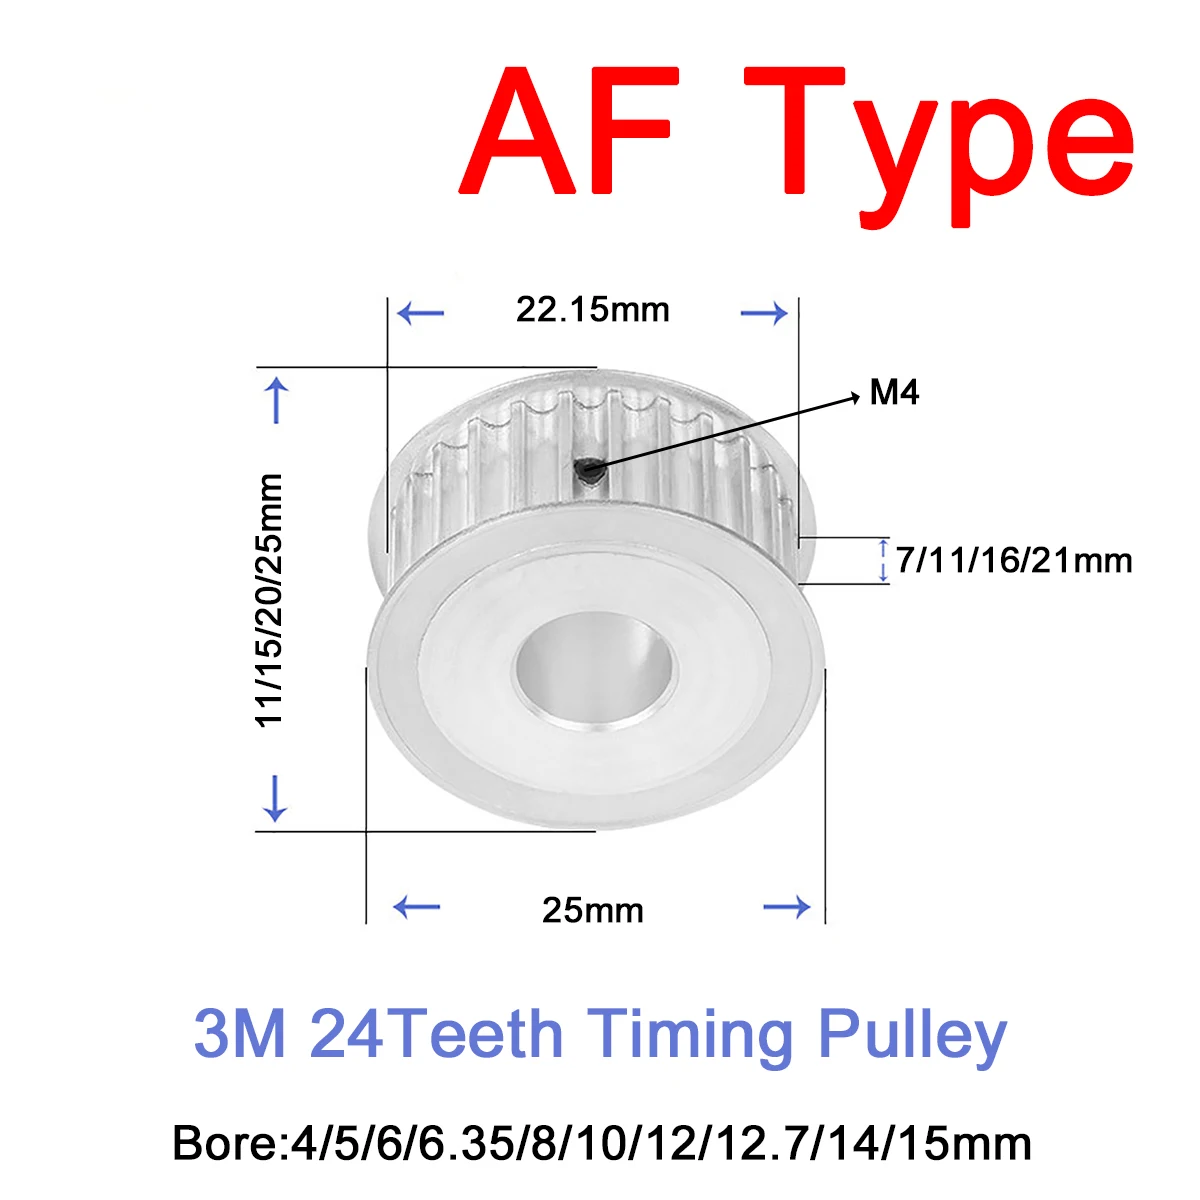 

1Pc 24Teeth 3M AF Type Synchronous Wheel Idler Pulley Bore 4/5/6/6.35/8/10/12/12.7/14/15mm Timing Pulley Width 7/11/16/21mm